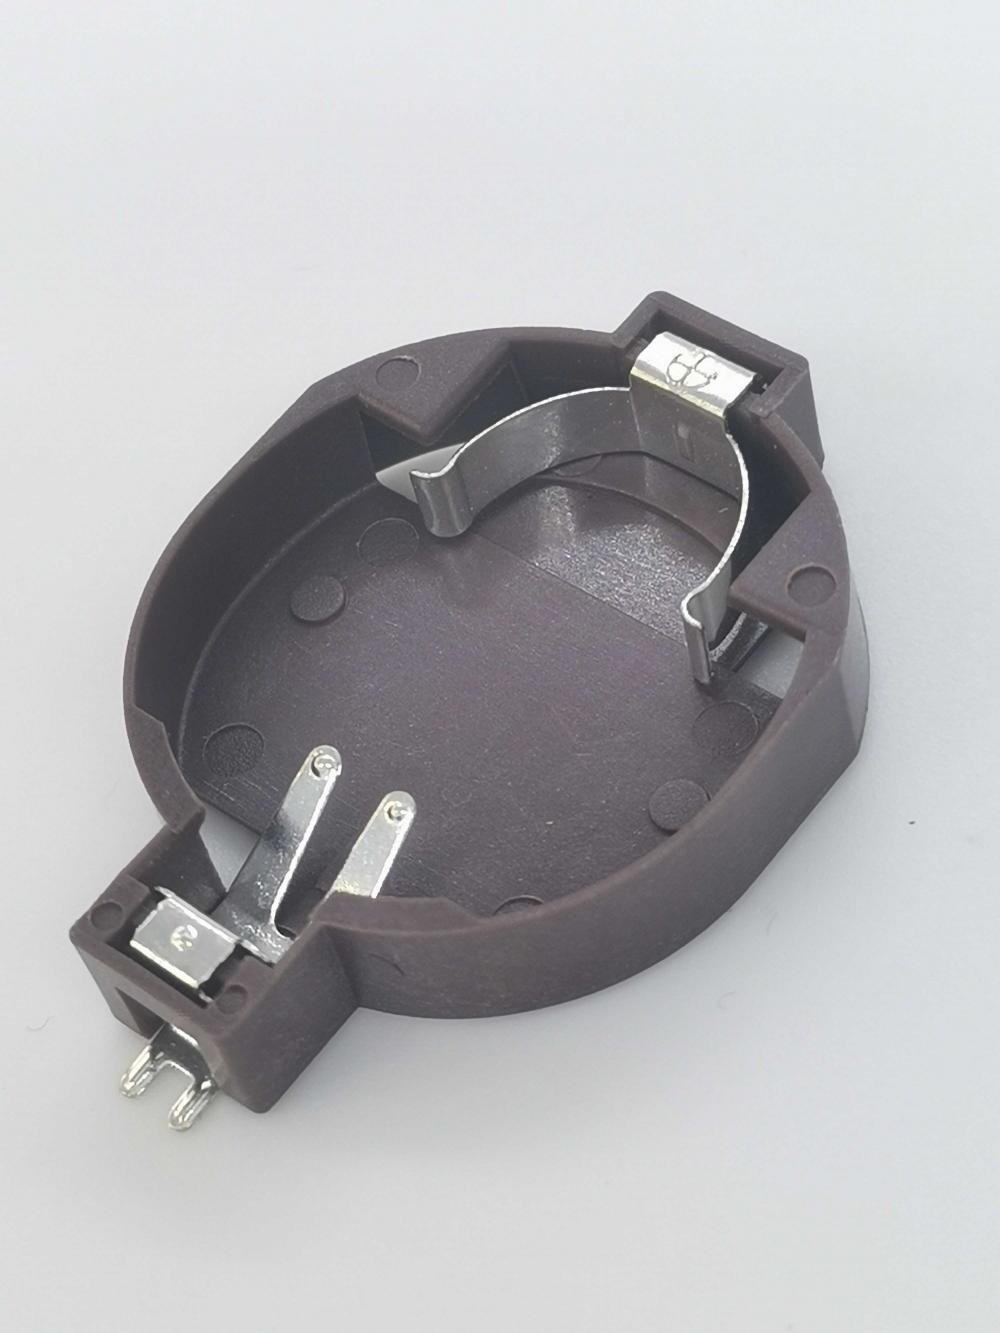 SMT / SMD CR2032 Round Coin Cell